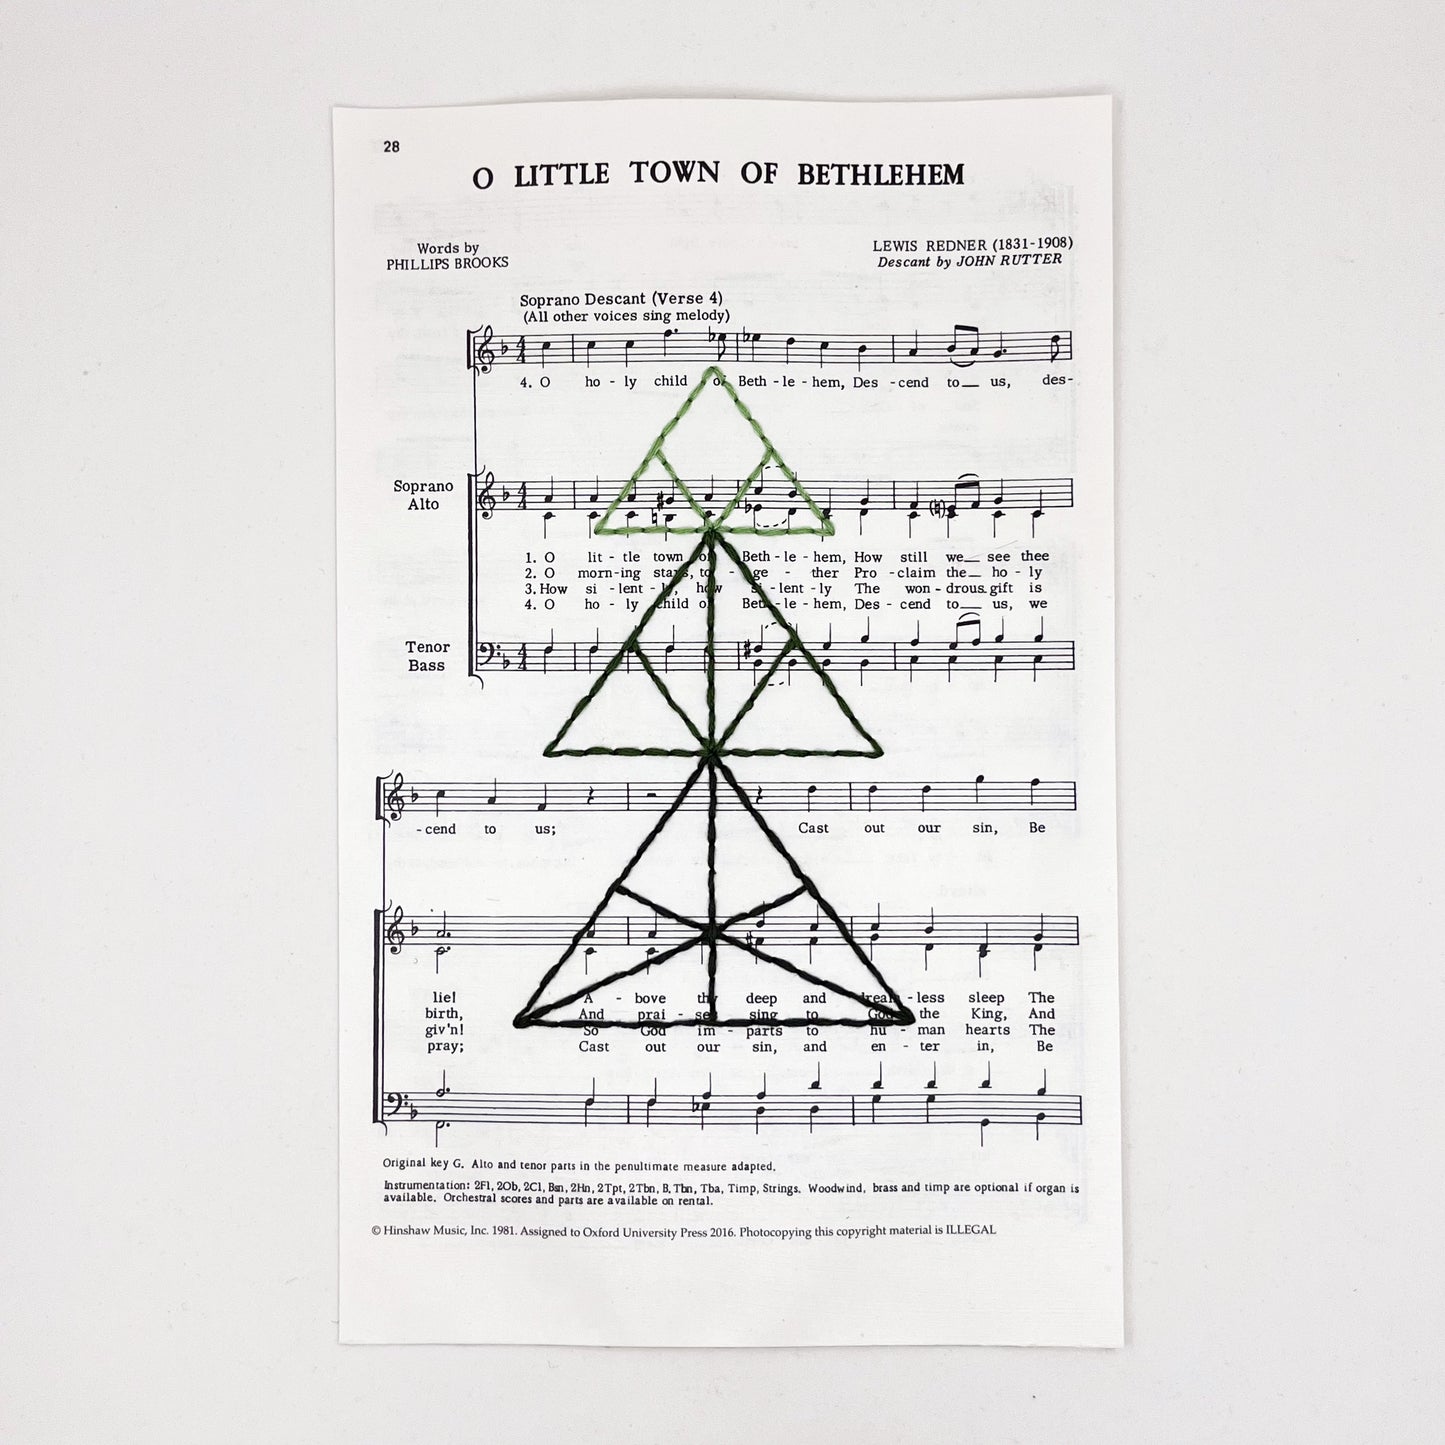 sheet music from the Christmas "O Little Town of Bethlehem", hand stitched over with a Christmas tree made from triangles, in shades of green thread